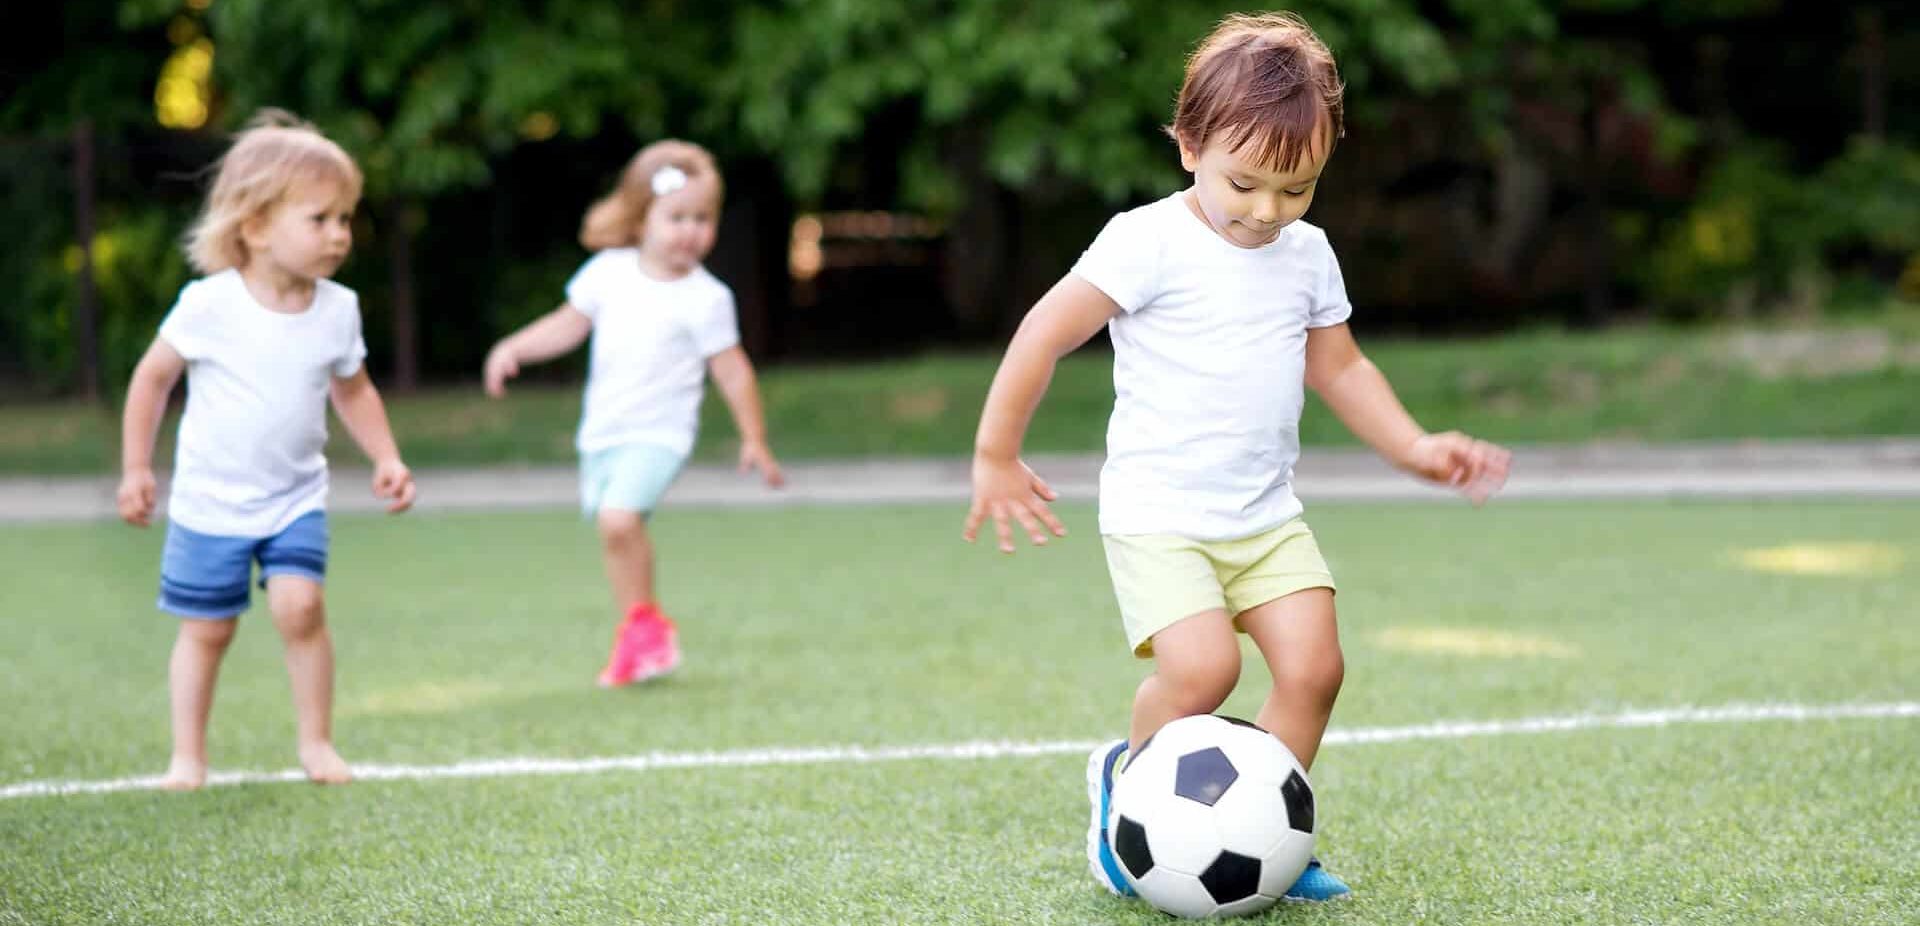 Practical Ways To Develop Your Child’s Motor Skills